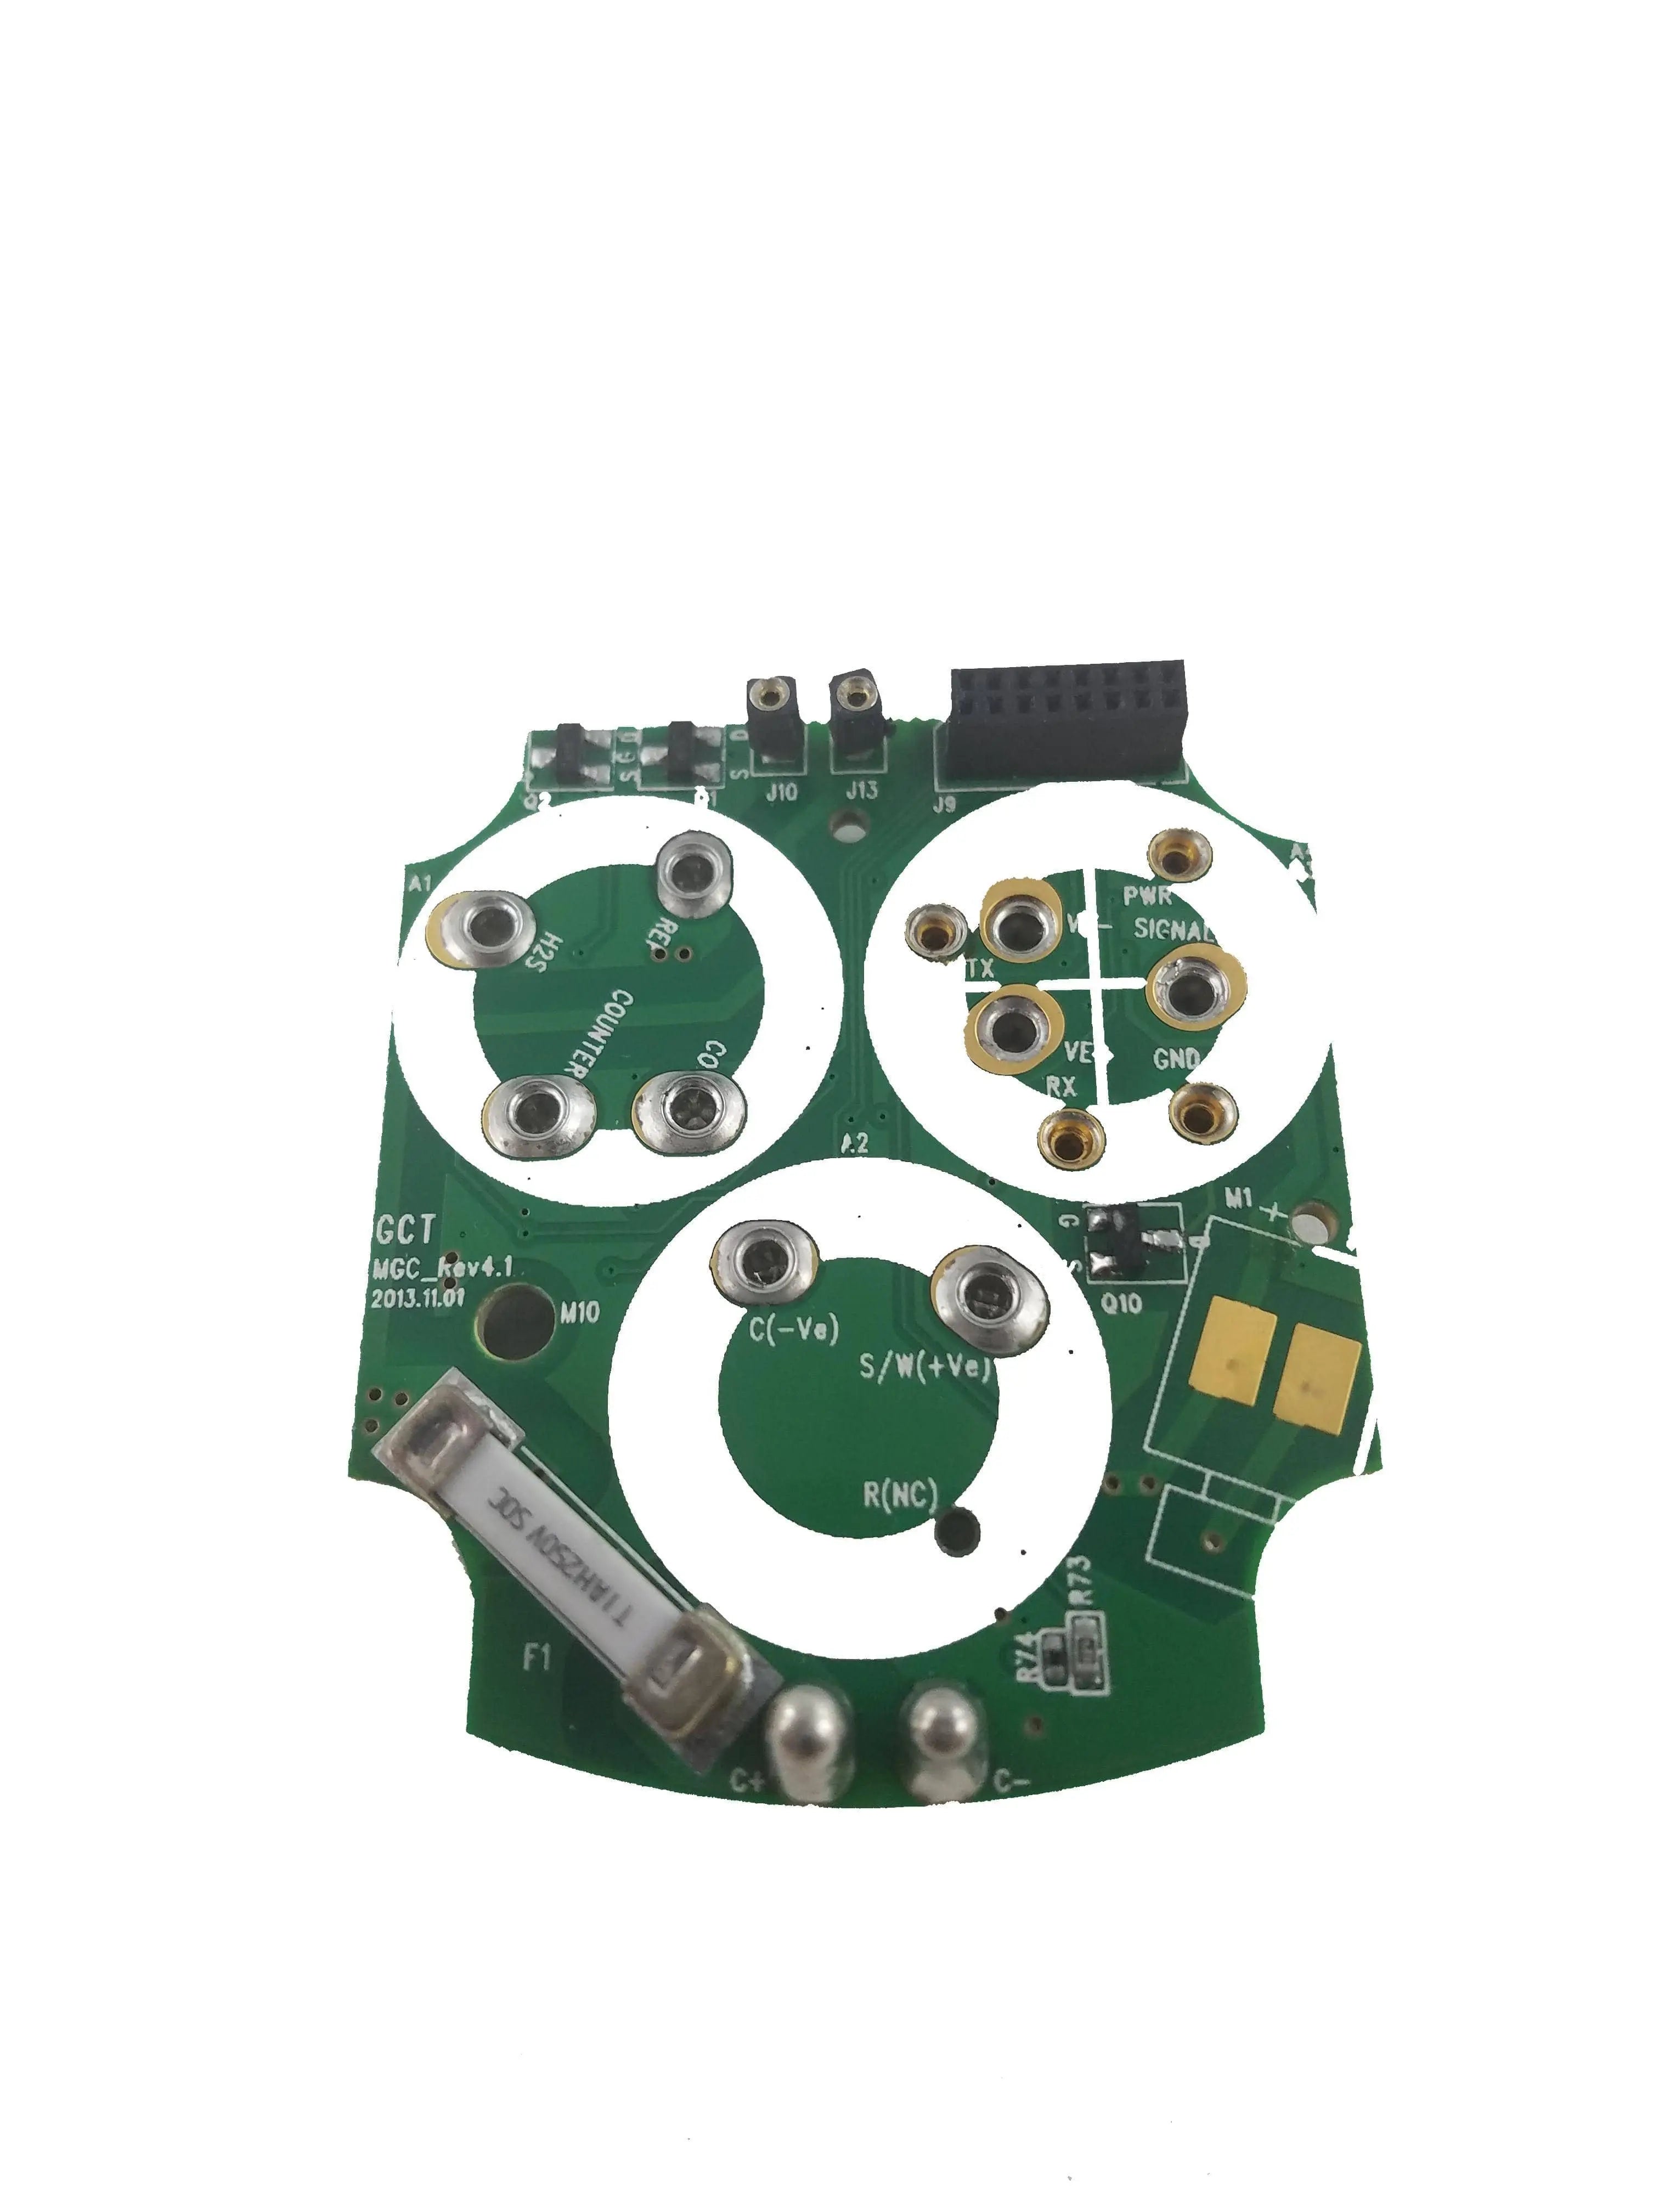 GAS CLIP - MGC Sensor Replacement PCB Board - Becker Safety and Supply